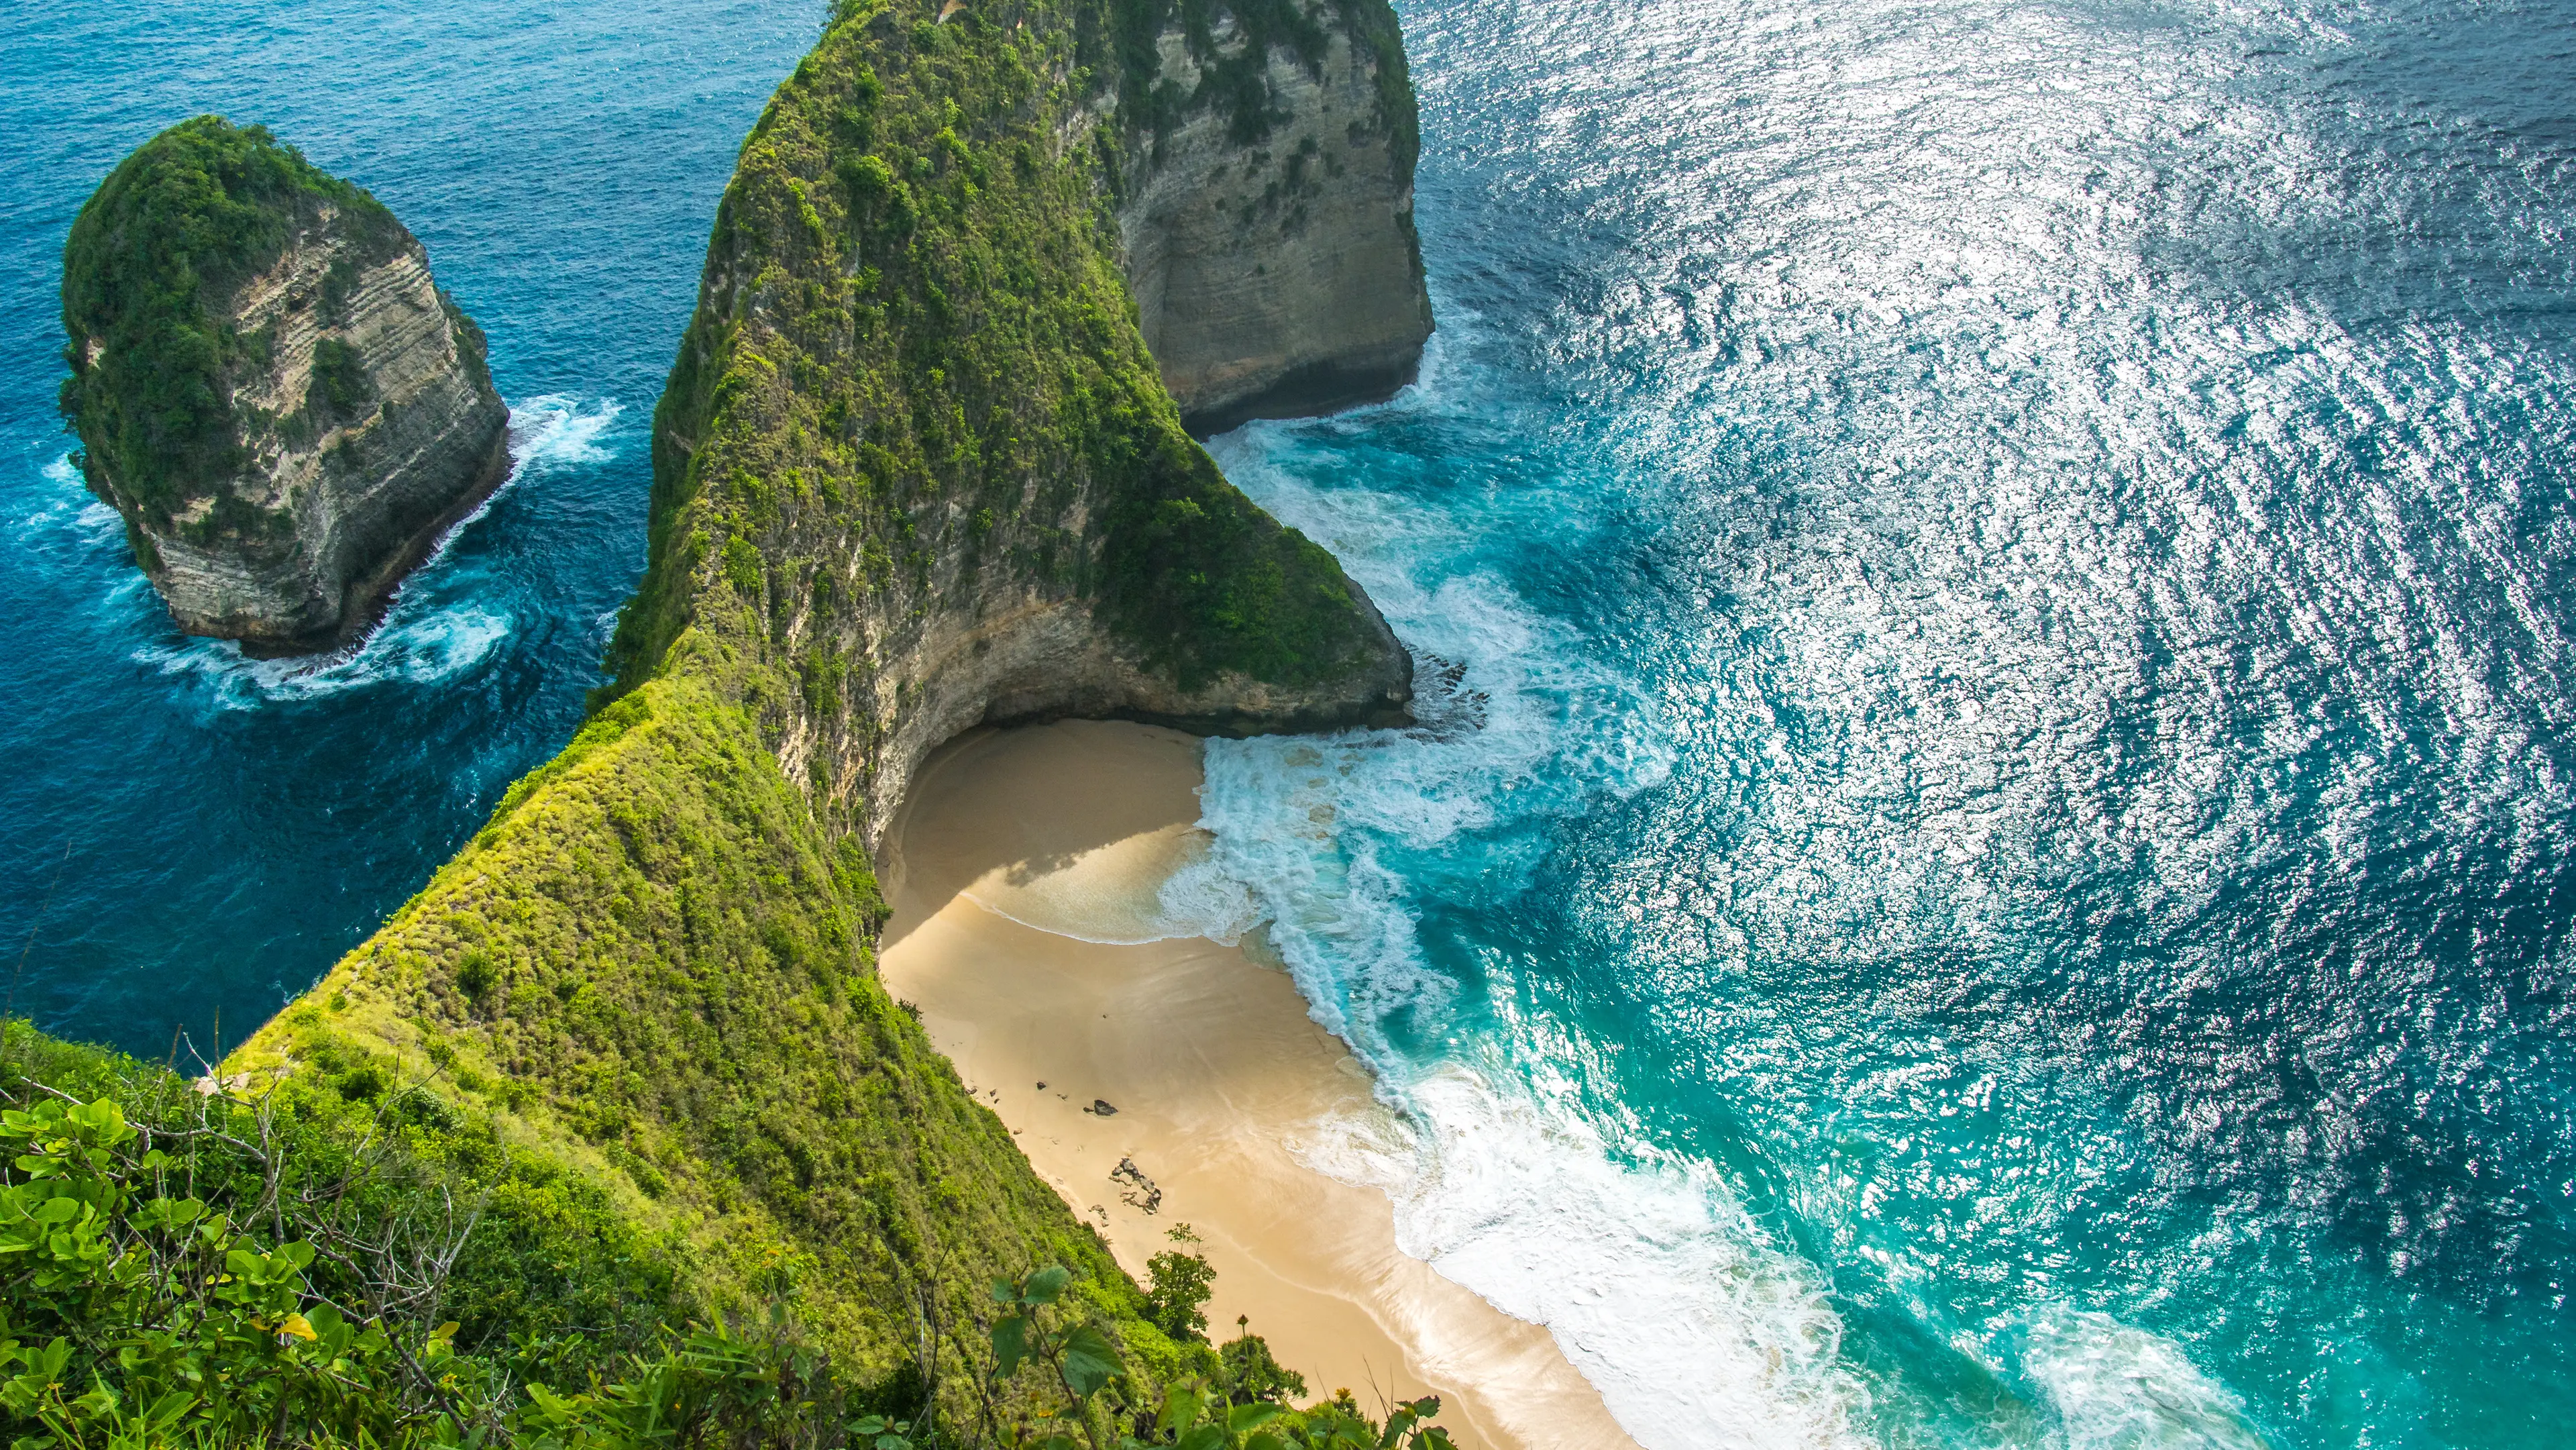 6-Day Exquisite Bali, Indonesia: An Unforgettable Journey